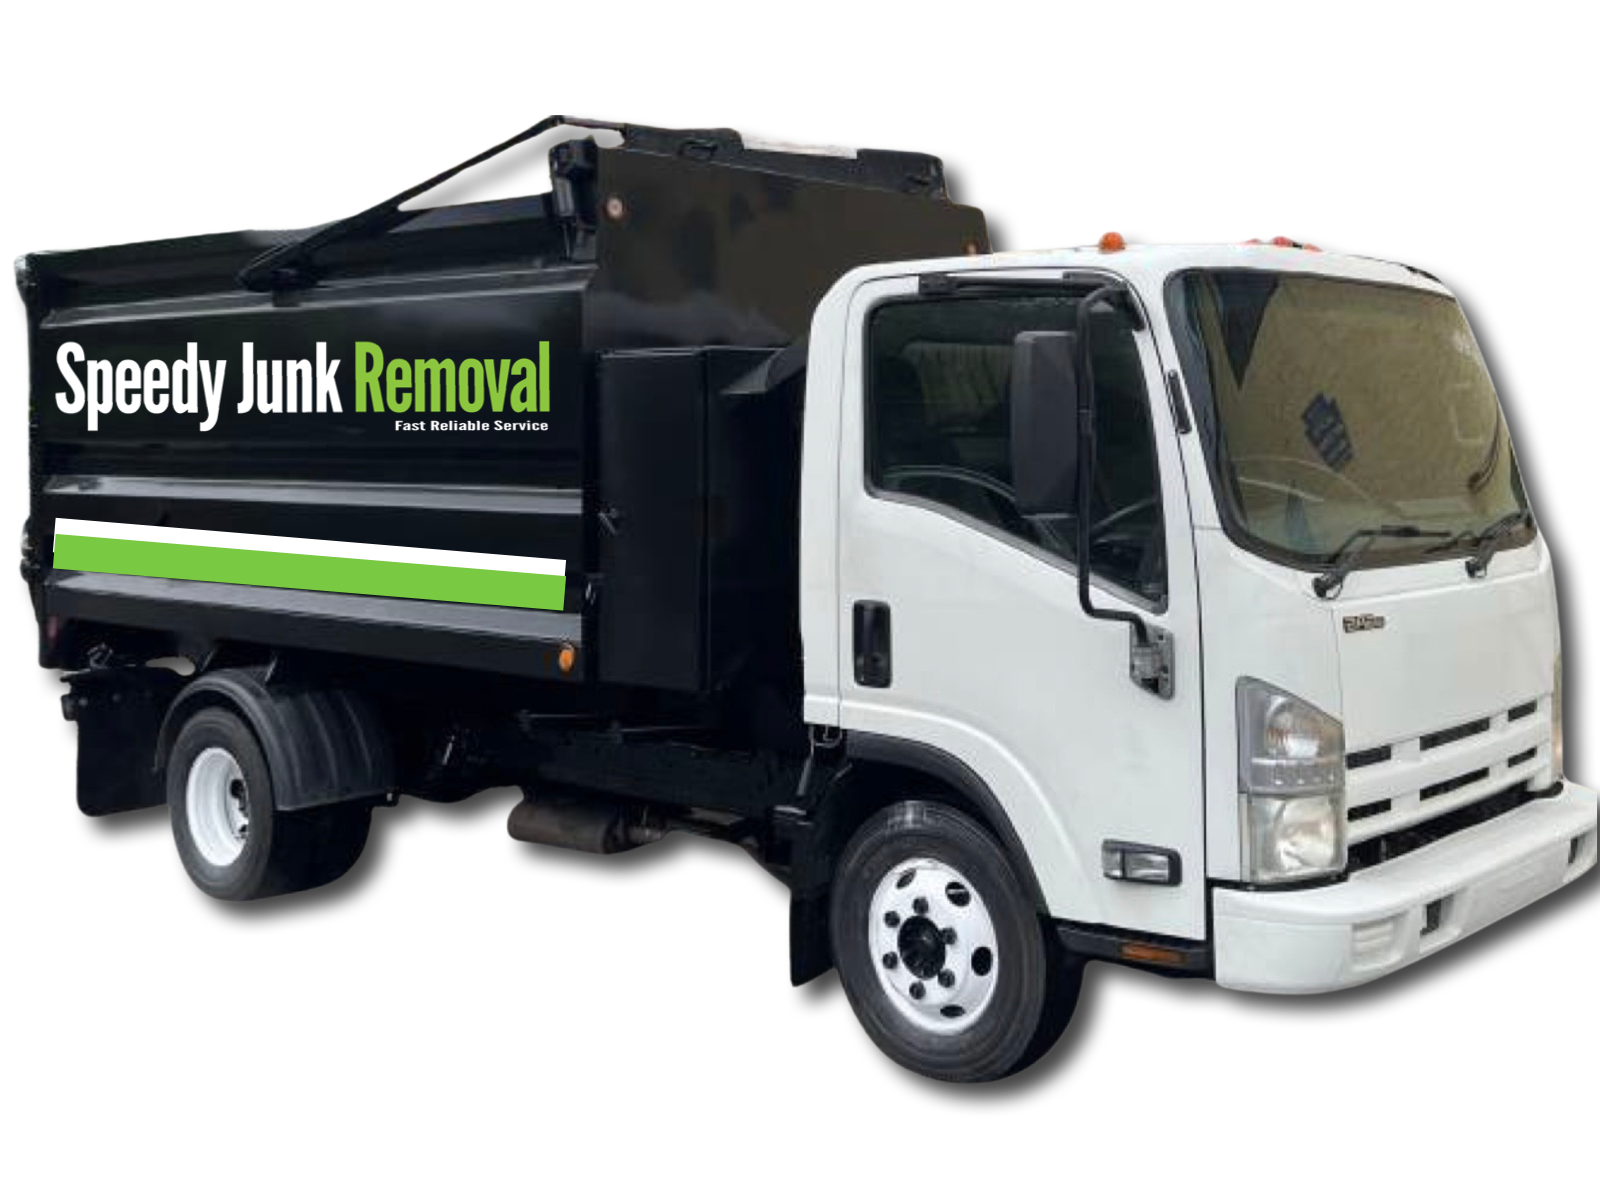 Junk Removal Costs To Get Rid Of Junk In New Hampshire & Ma